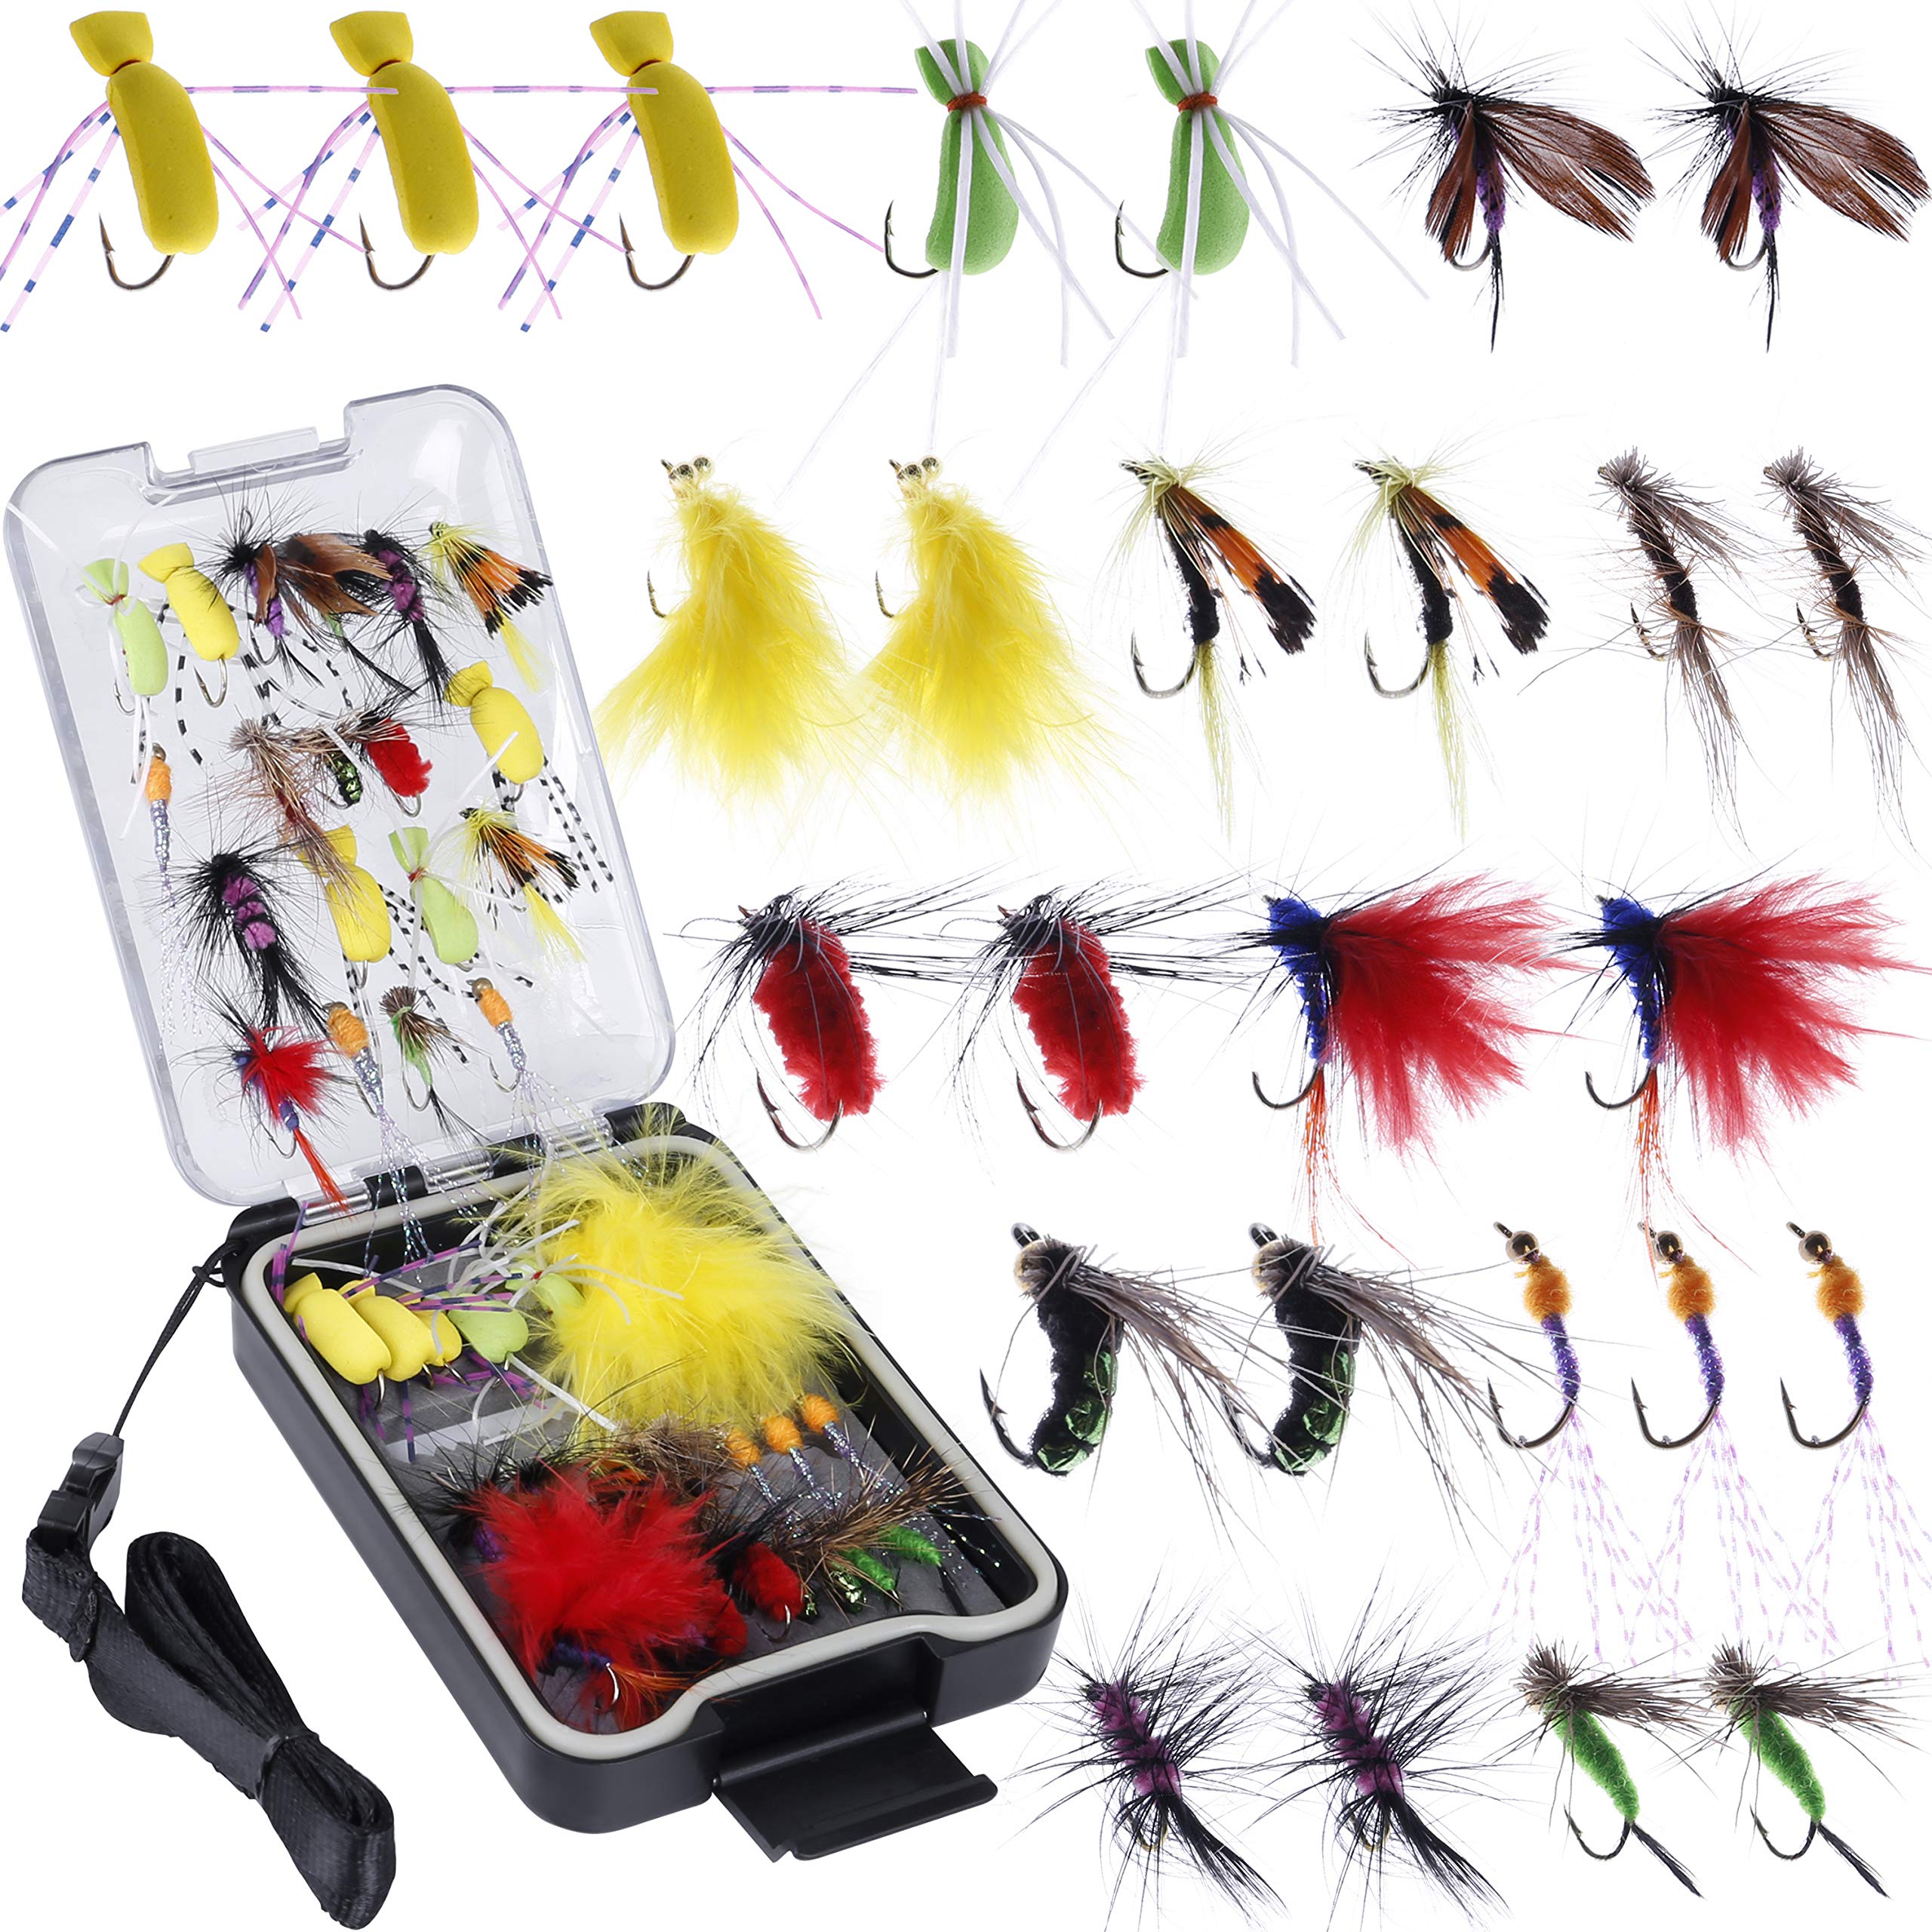 PLUSINNO Fly Fishing Flies Kit, 26/78Pcs Handmade Fly Fishing Gear with  Dry/Wet Flies, Streamers, Fly Assortment Trout Bass Fishing with Fly Box  26pcs